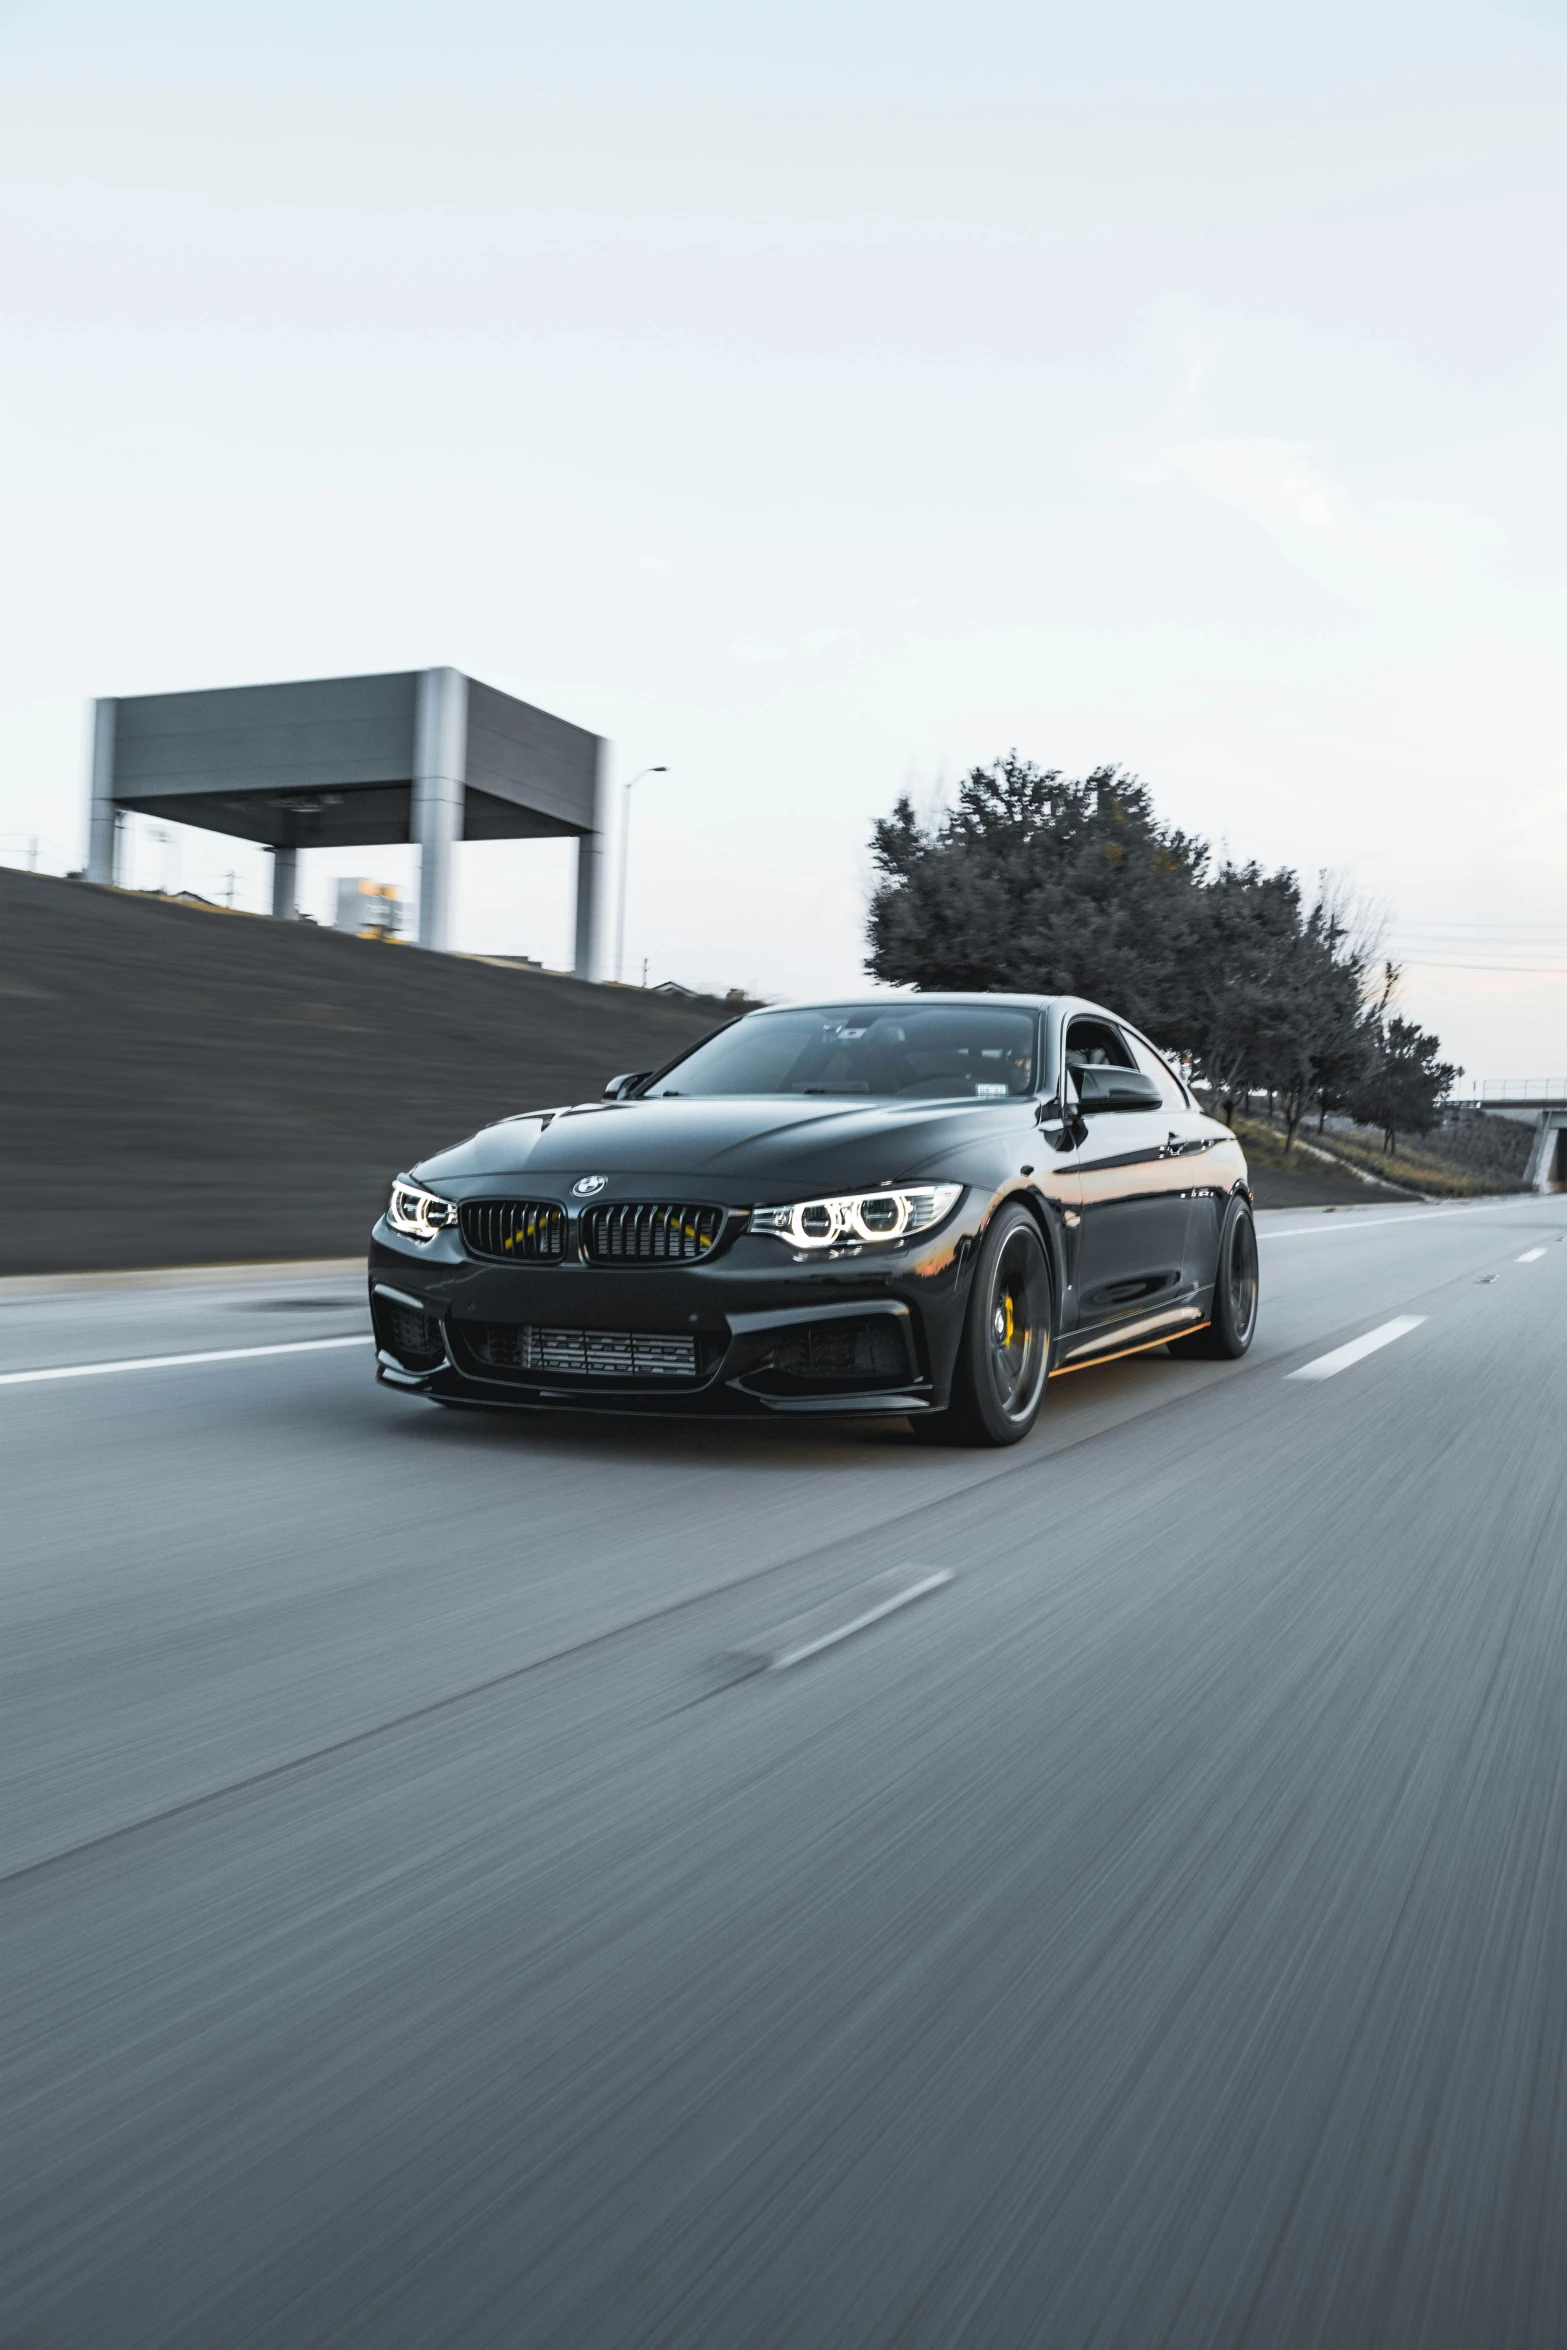 a black and gold bmw car driving on an empty road